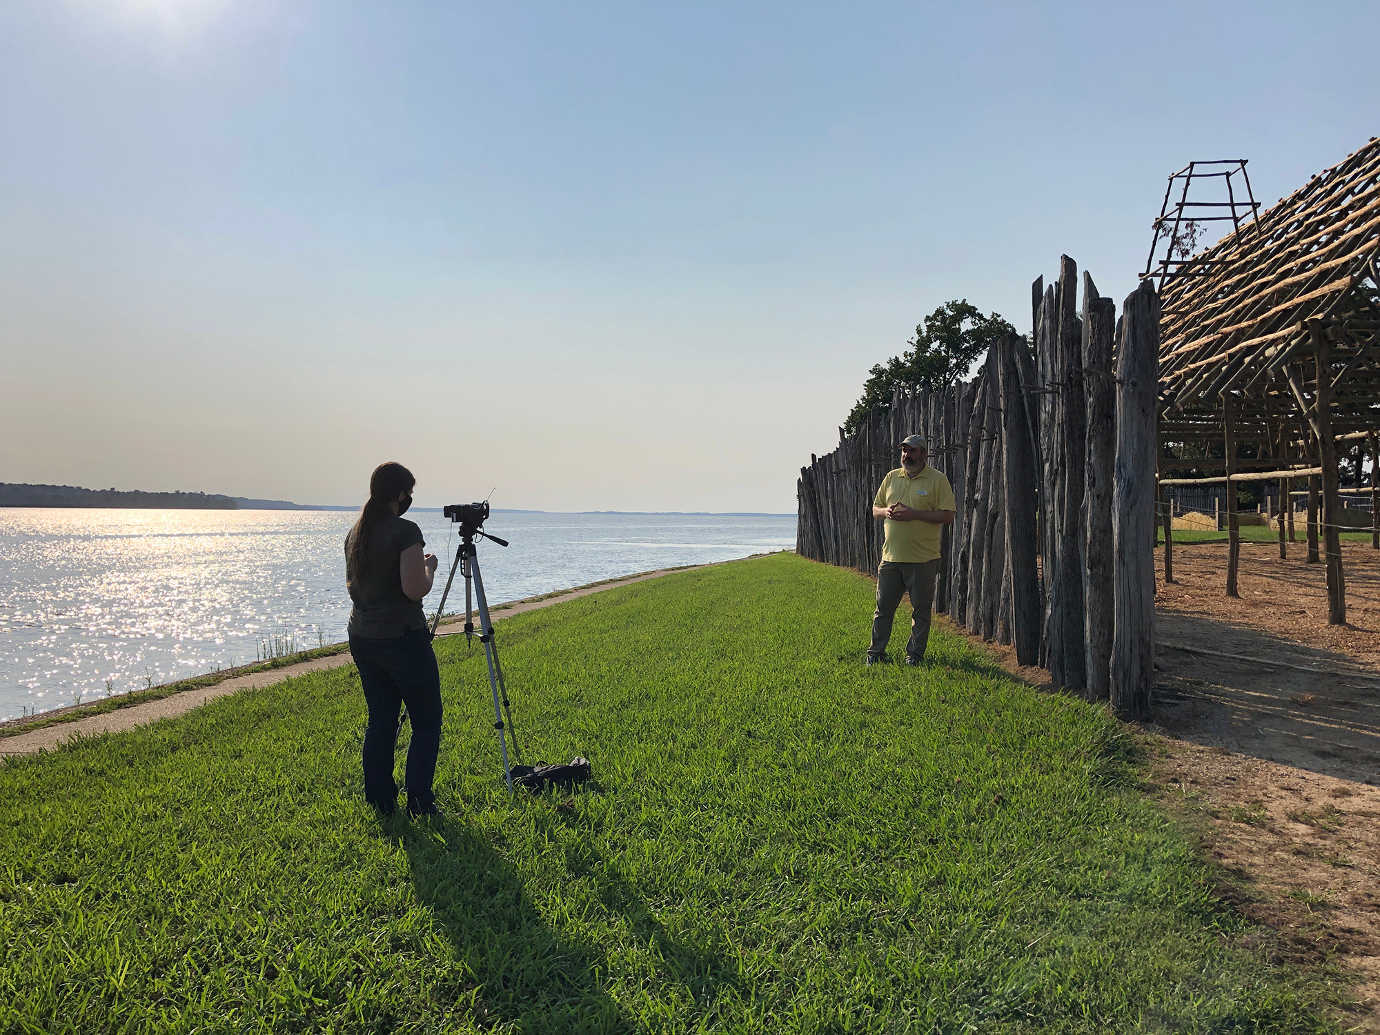 Jamestown Rediscovery staff develop video tours of the Jamestown Fort. Image courtesy of Jamestown Rediscovery.